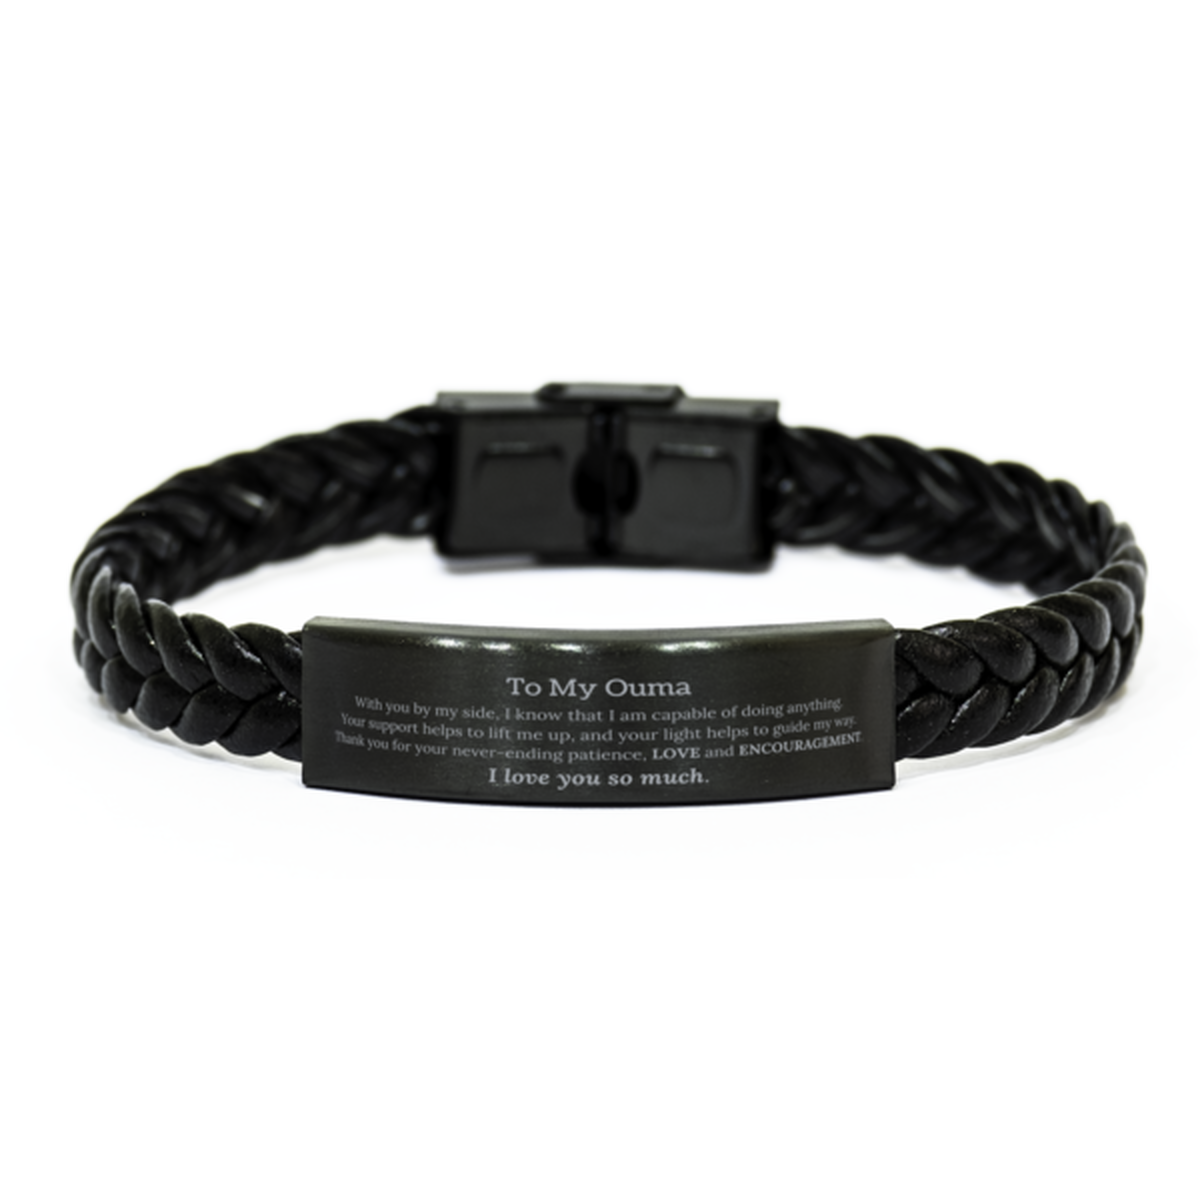 Appreciation Ouma Braided Leather Bracelet Gifts, To My Ouma Birthday Christmas Wedding Keepsake Gifts for Ouma With you by my side, I know that I am capable of doing anything. I love you so much